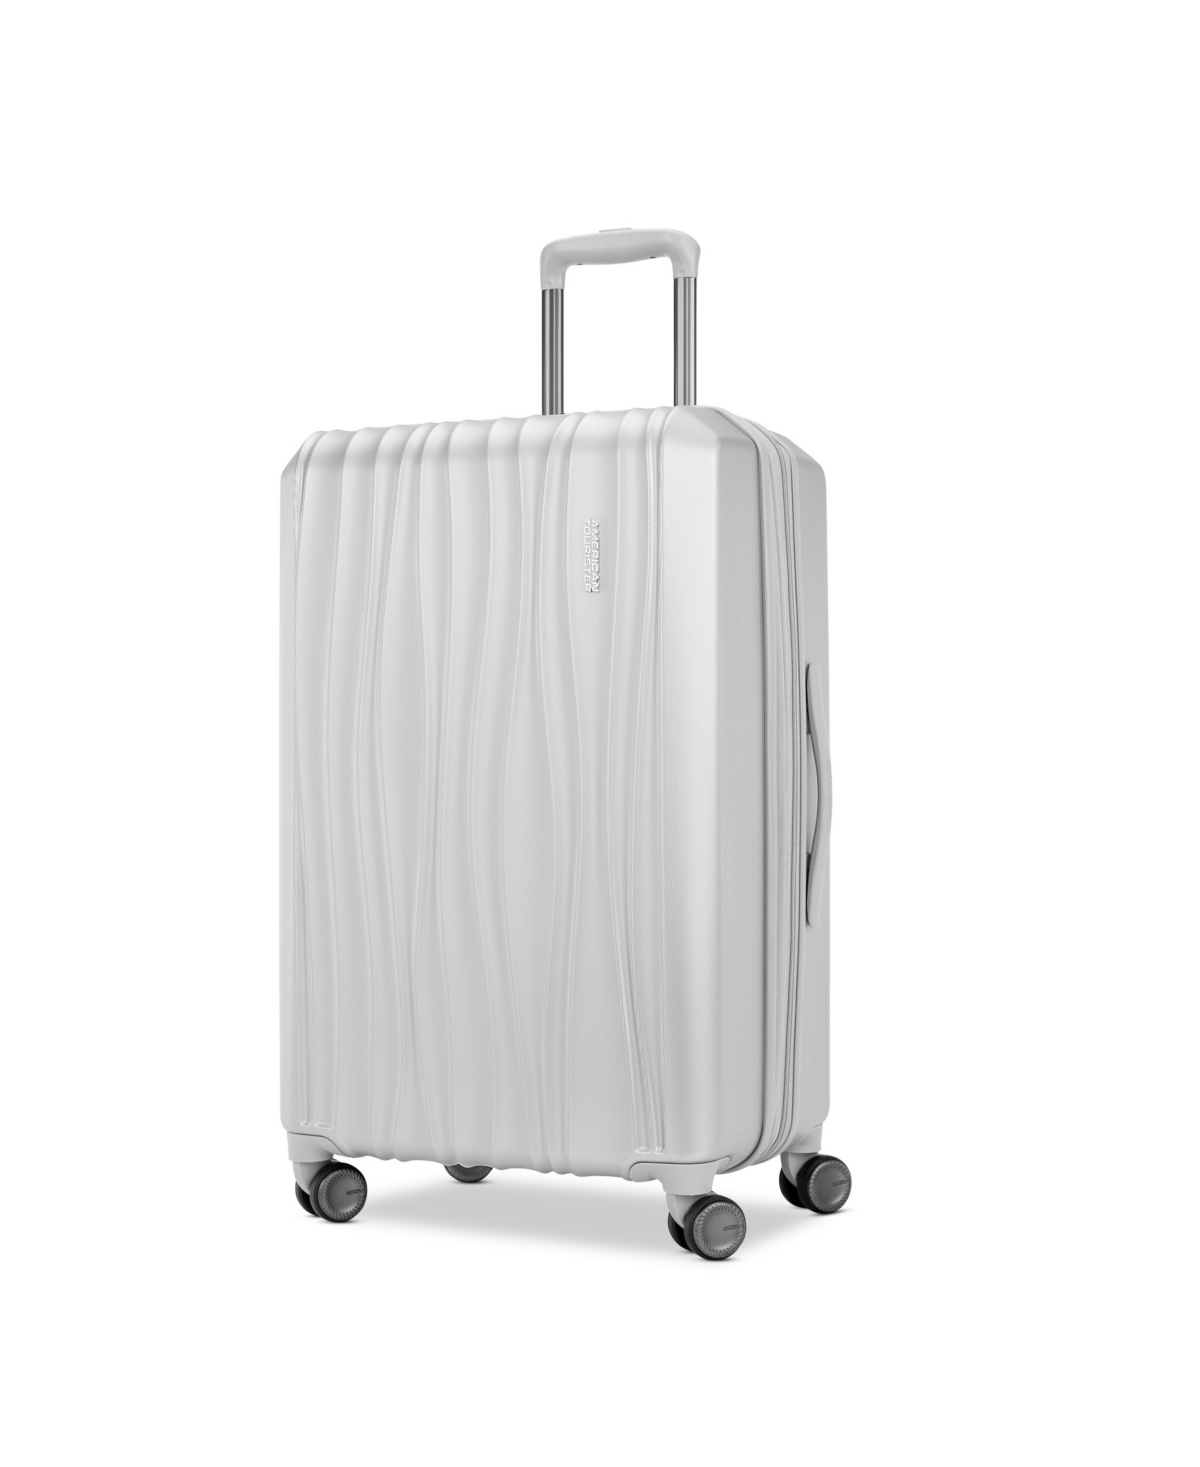 American Tourister Tribute Encore Hardside Check-in 24" Spinner Luggage In Silver